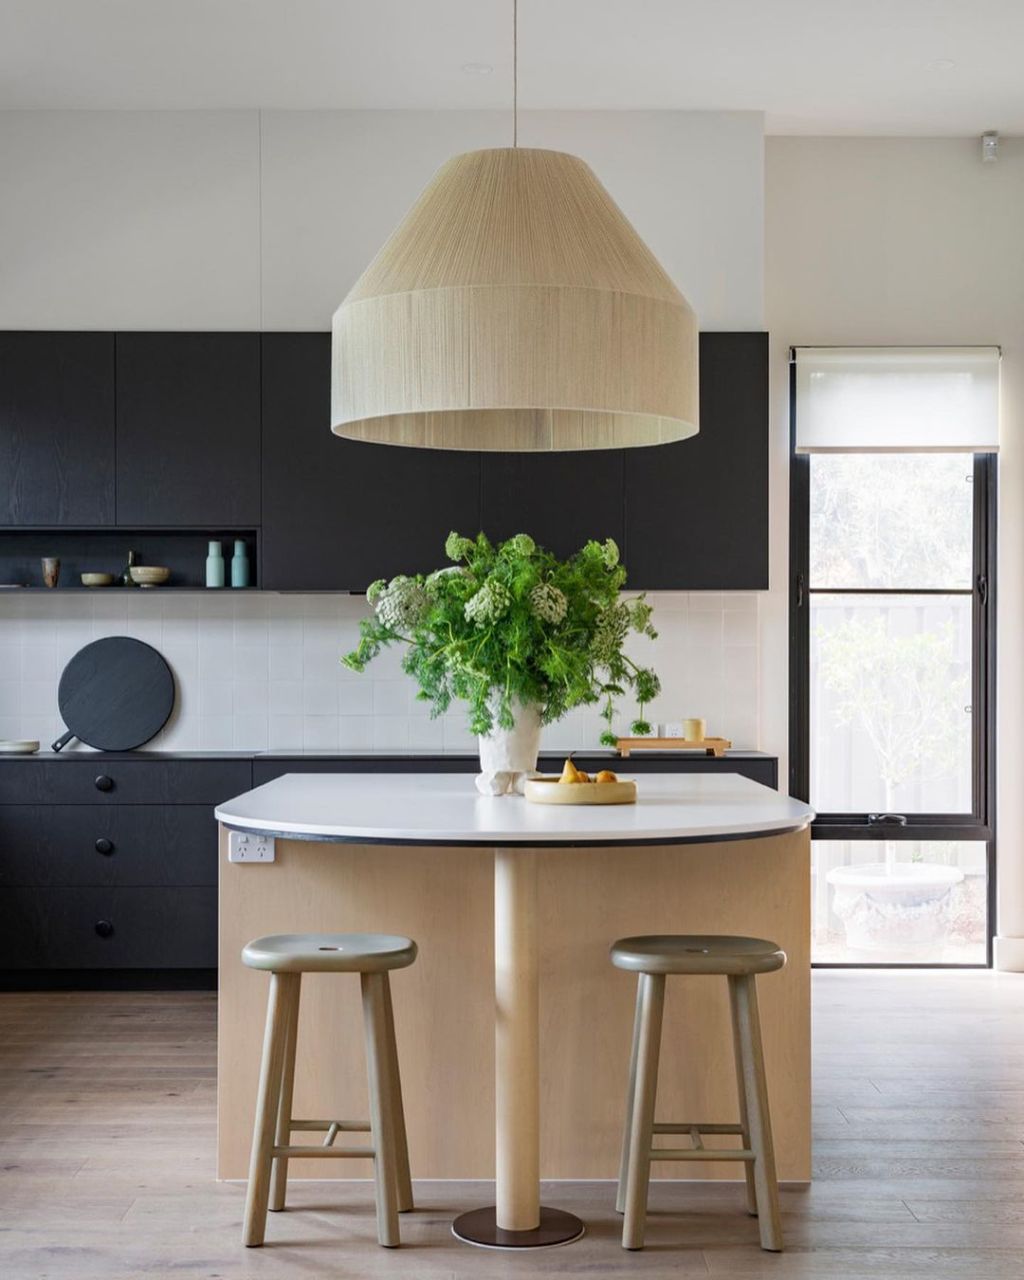 Wilson suggests playing with a contrast of darker and lighter wood tones. Pop and Scott light in home by Fabrikate Creative Spaces. Photo: Instagram: @popandscott